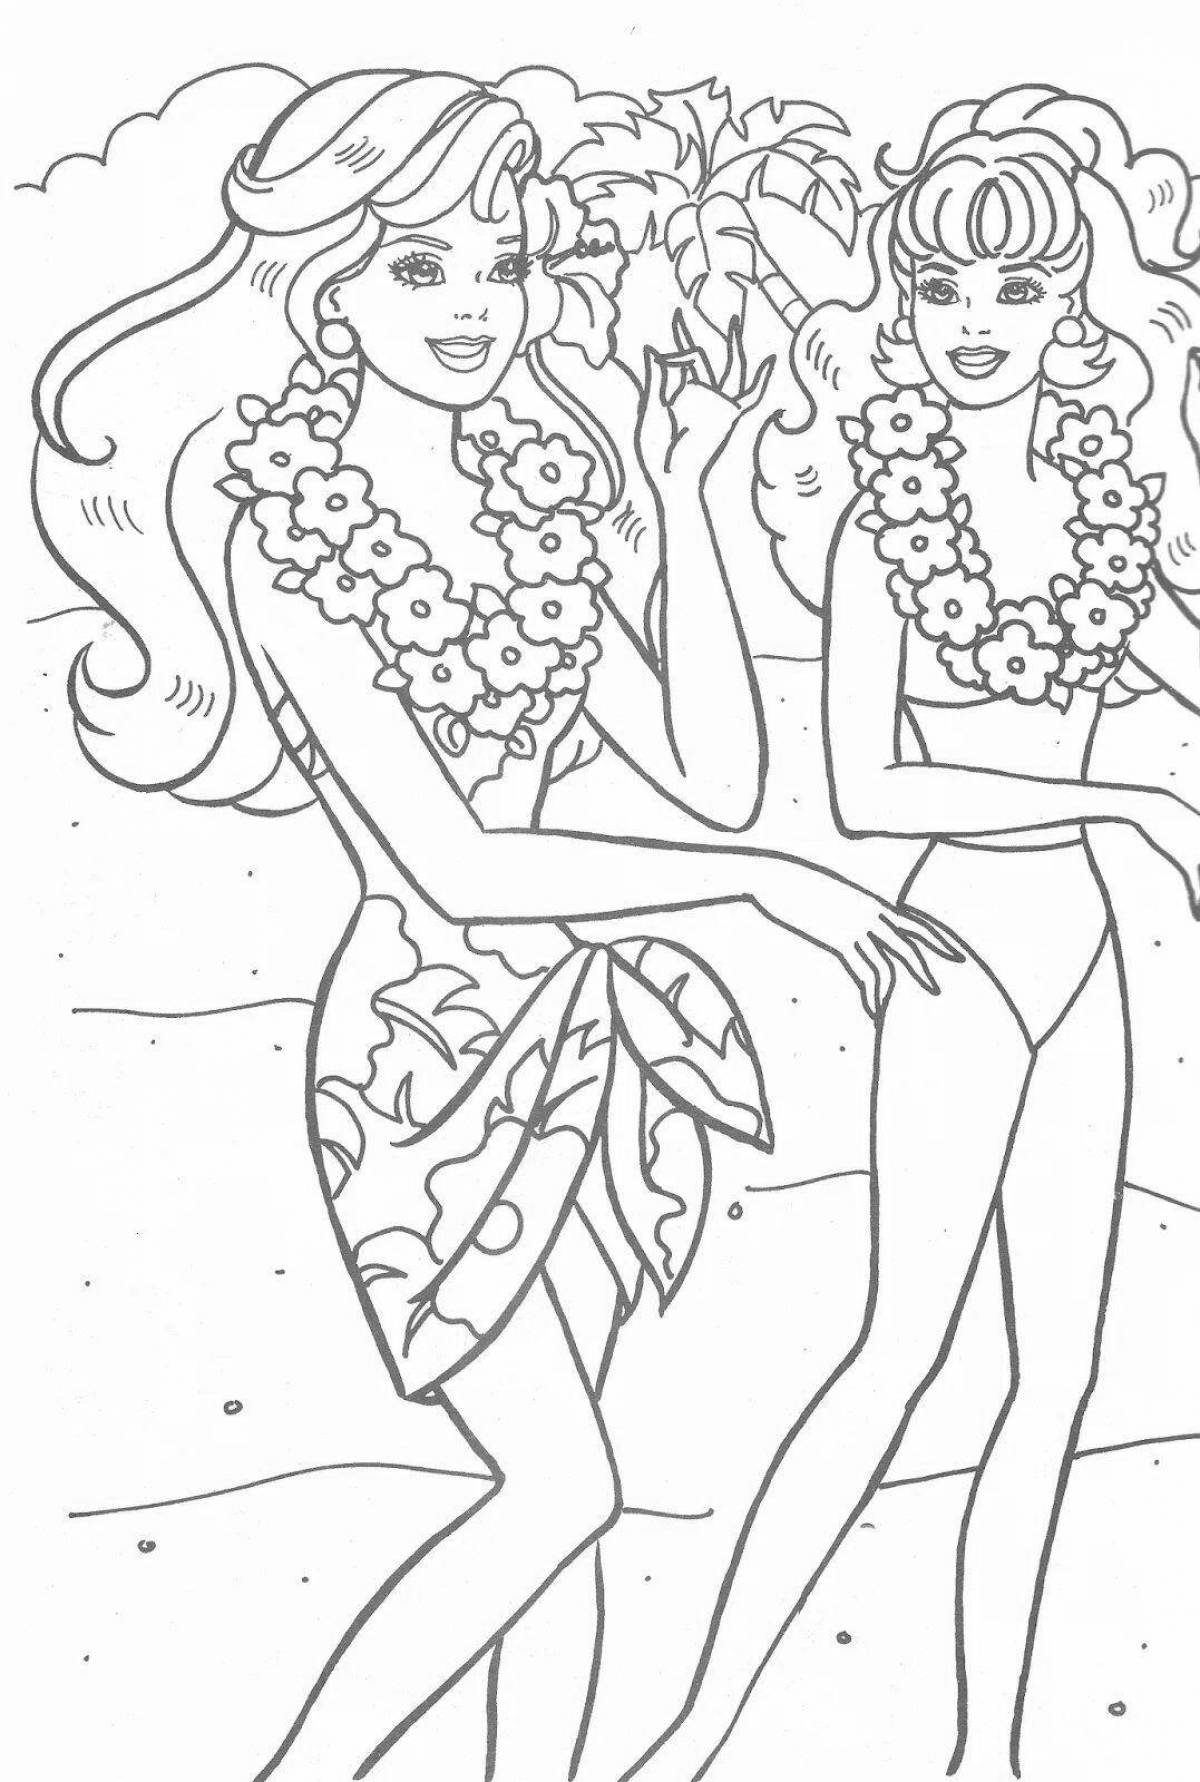 Adorable pregnant doll coloring page